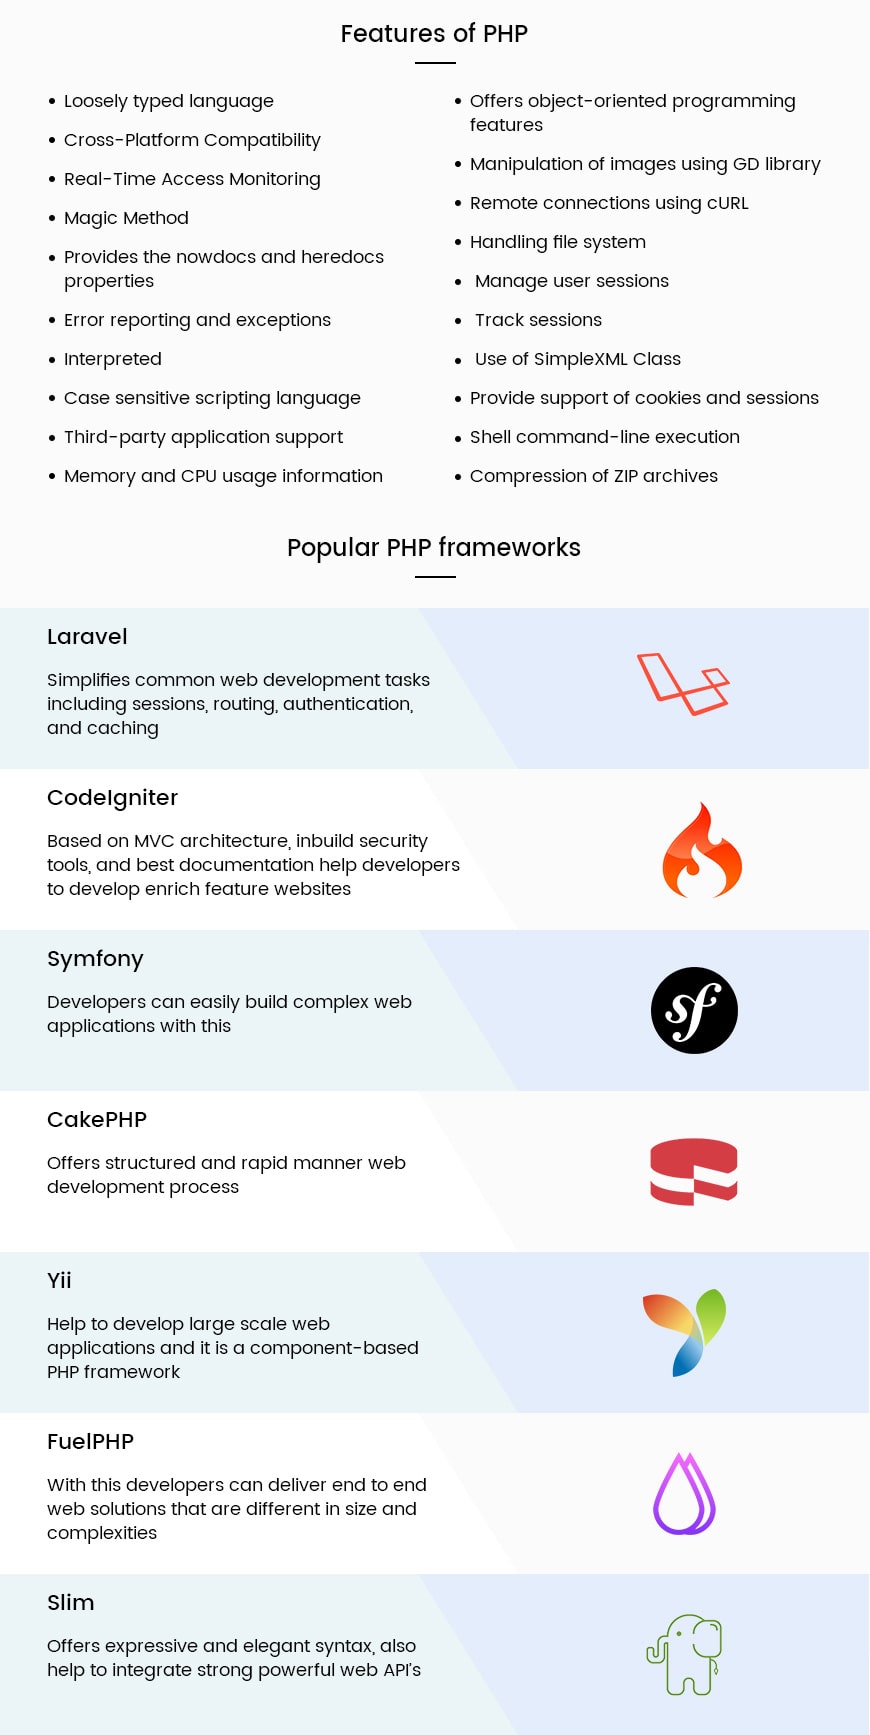 features of PHP framework